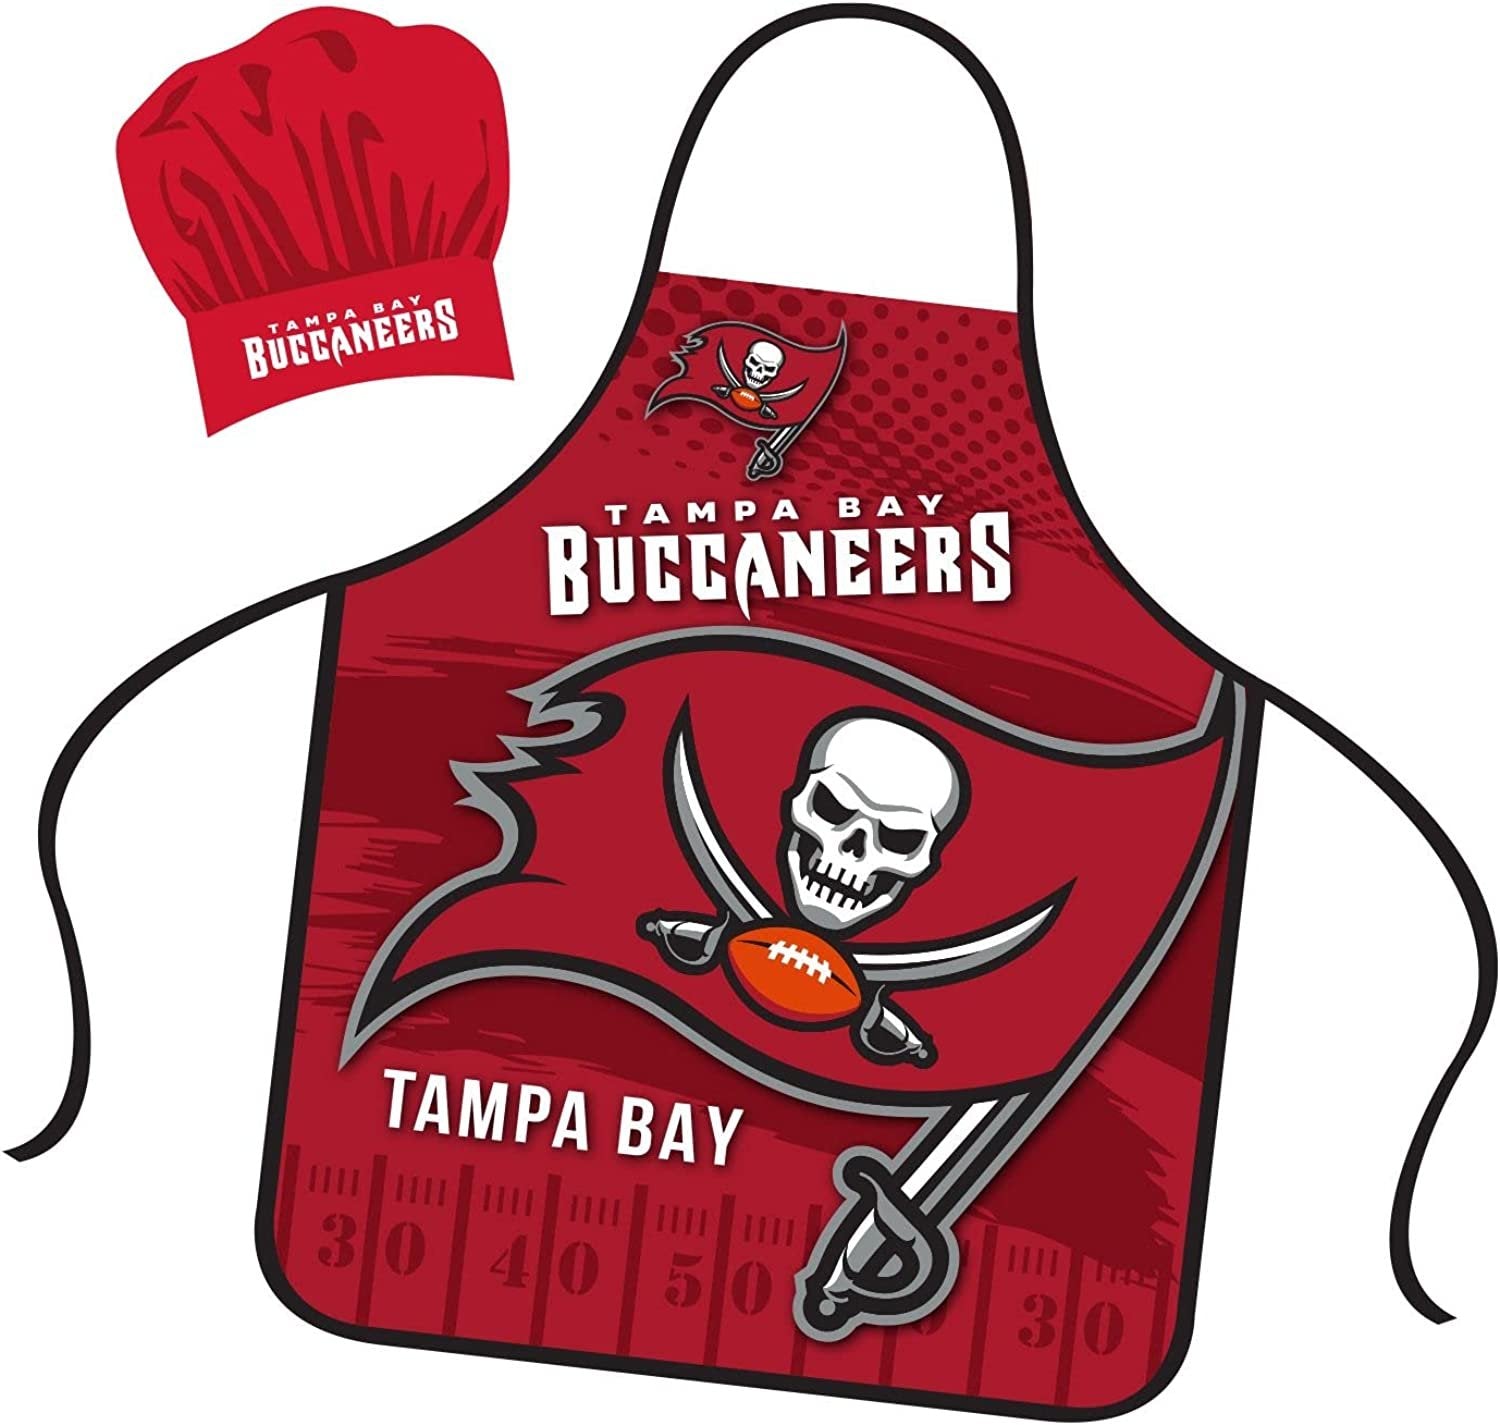 Tampa Bay Buccaneers Apron Chef Hat Set Full Color Universal Size Tie Back Grilling Tailgate BBQ Cooking Host